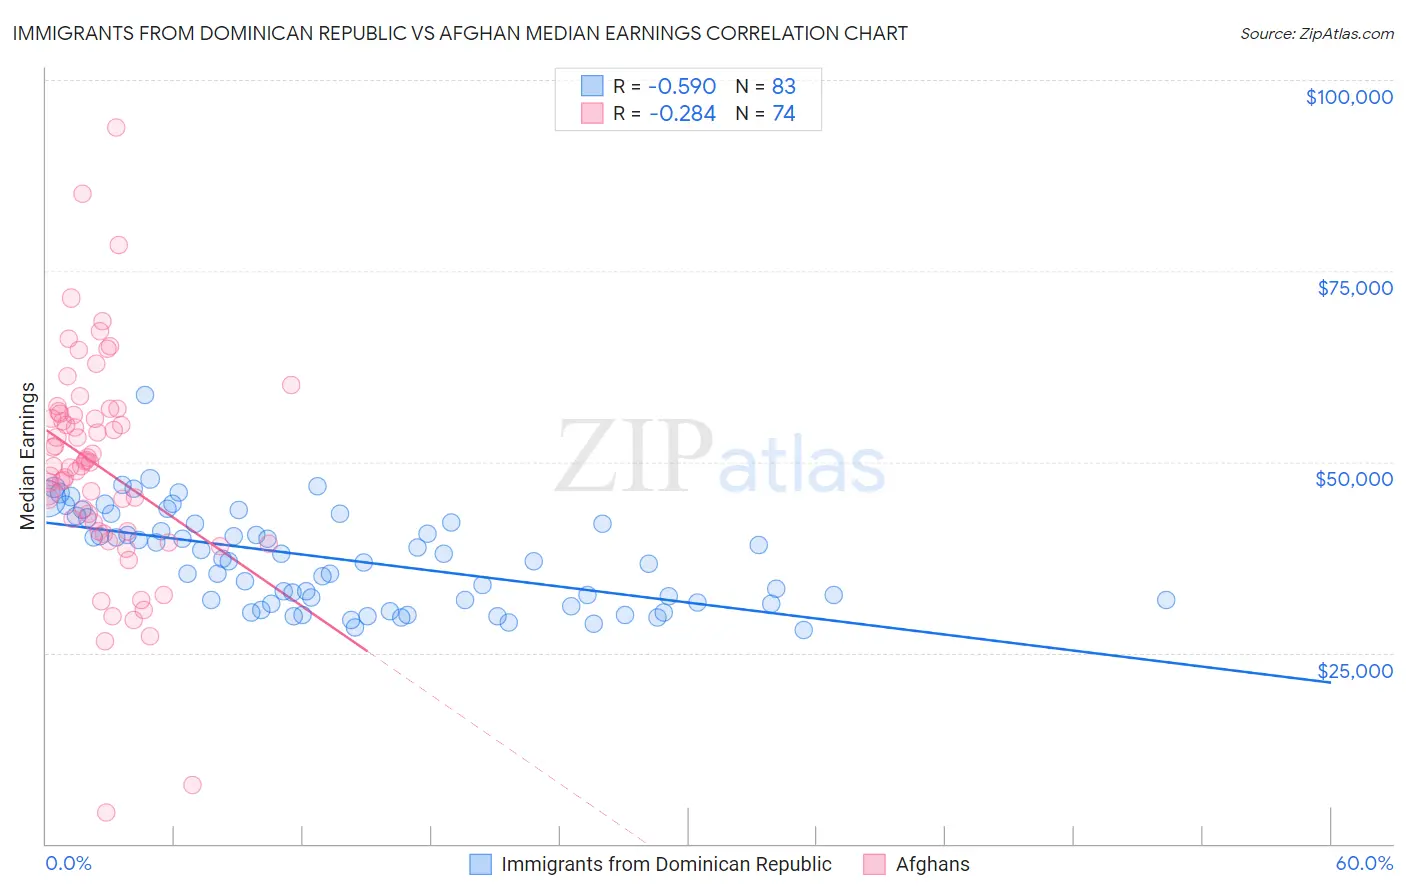 Immigrants from Dominican Republic vs Afghan Median Earnings